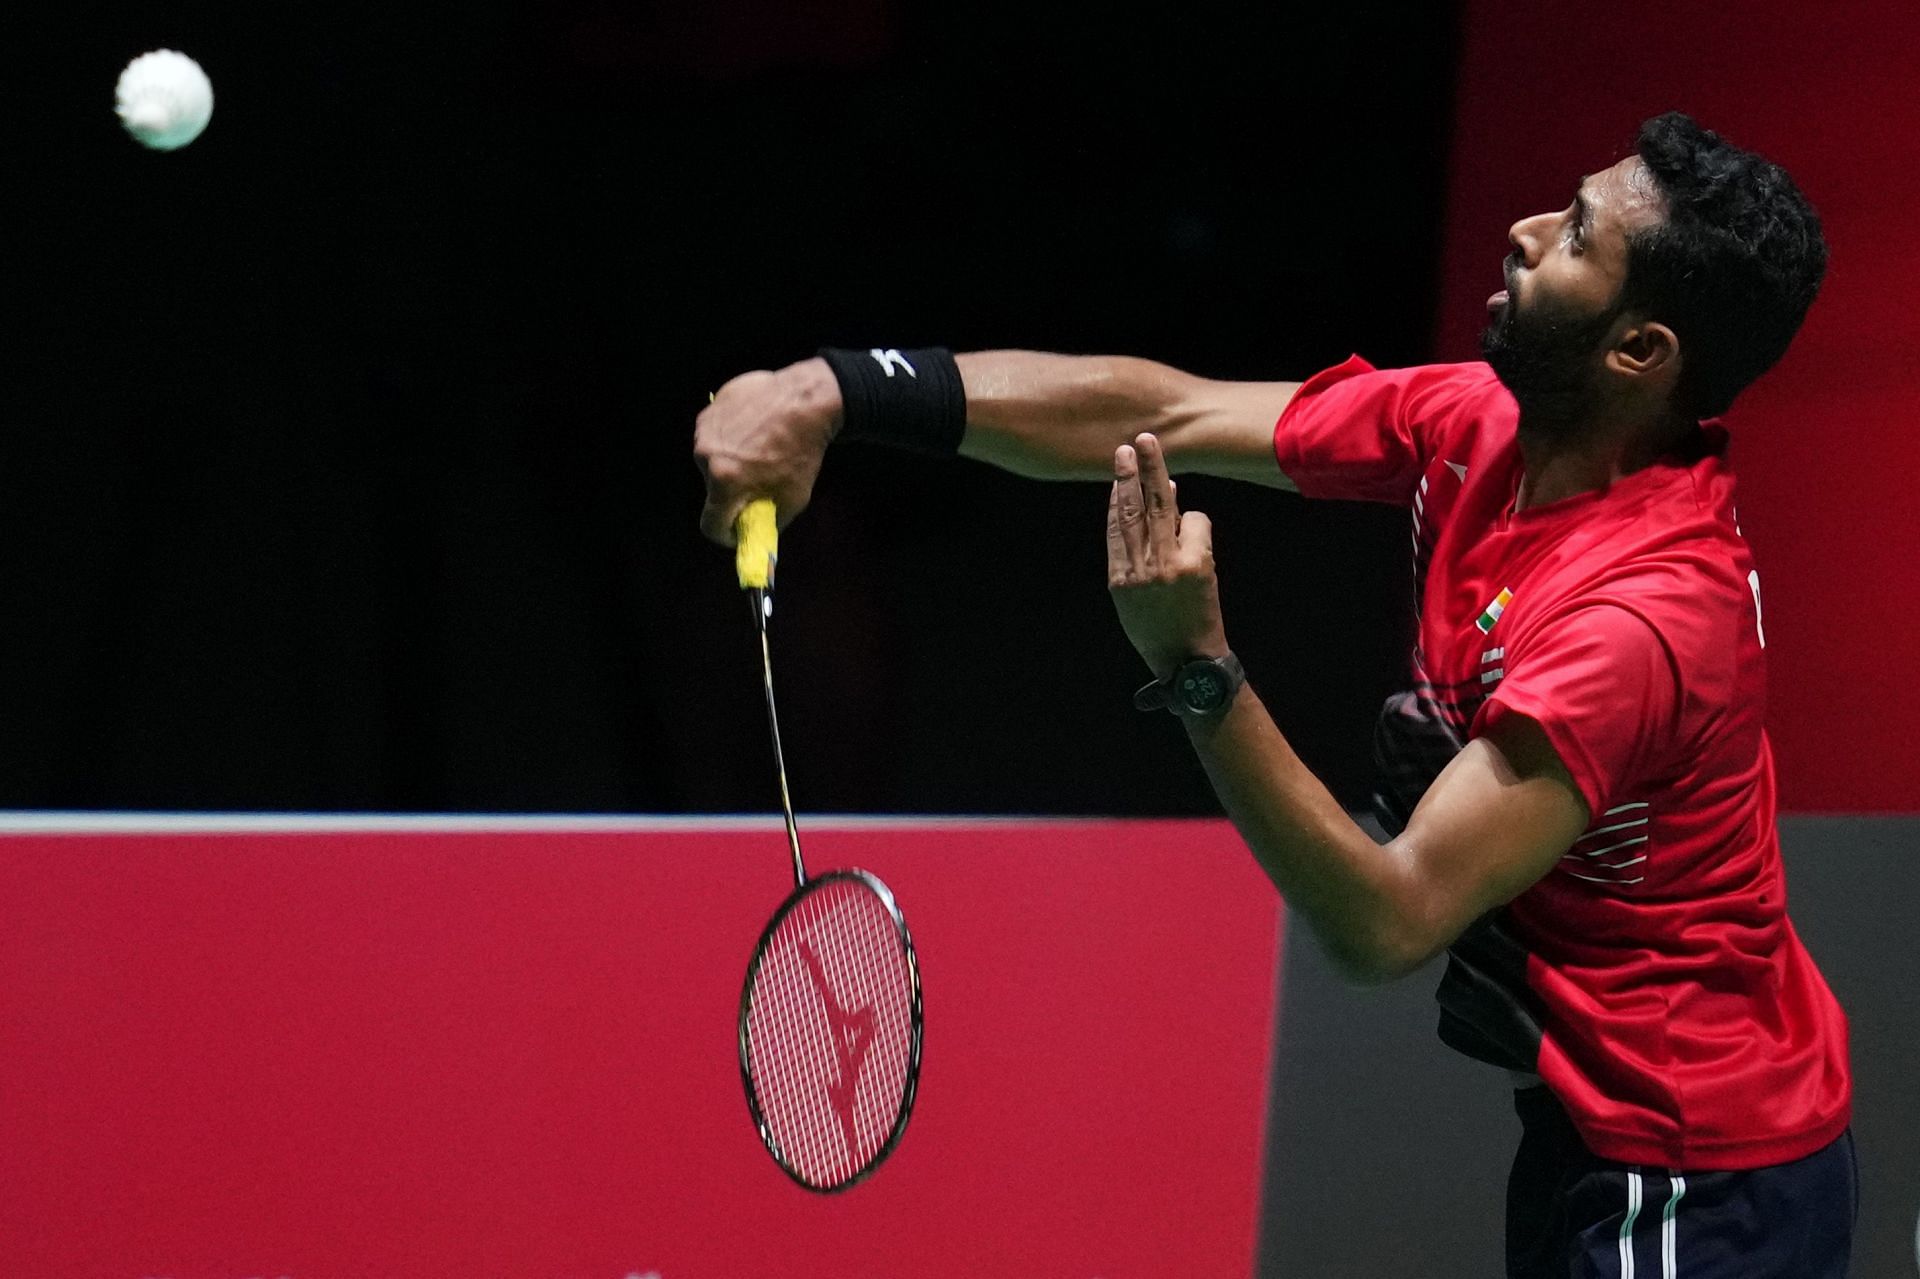 HS Prannoy in action at the 2022 BWF World Championships